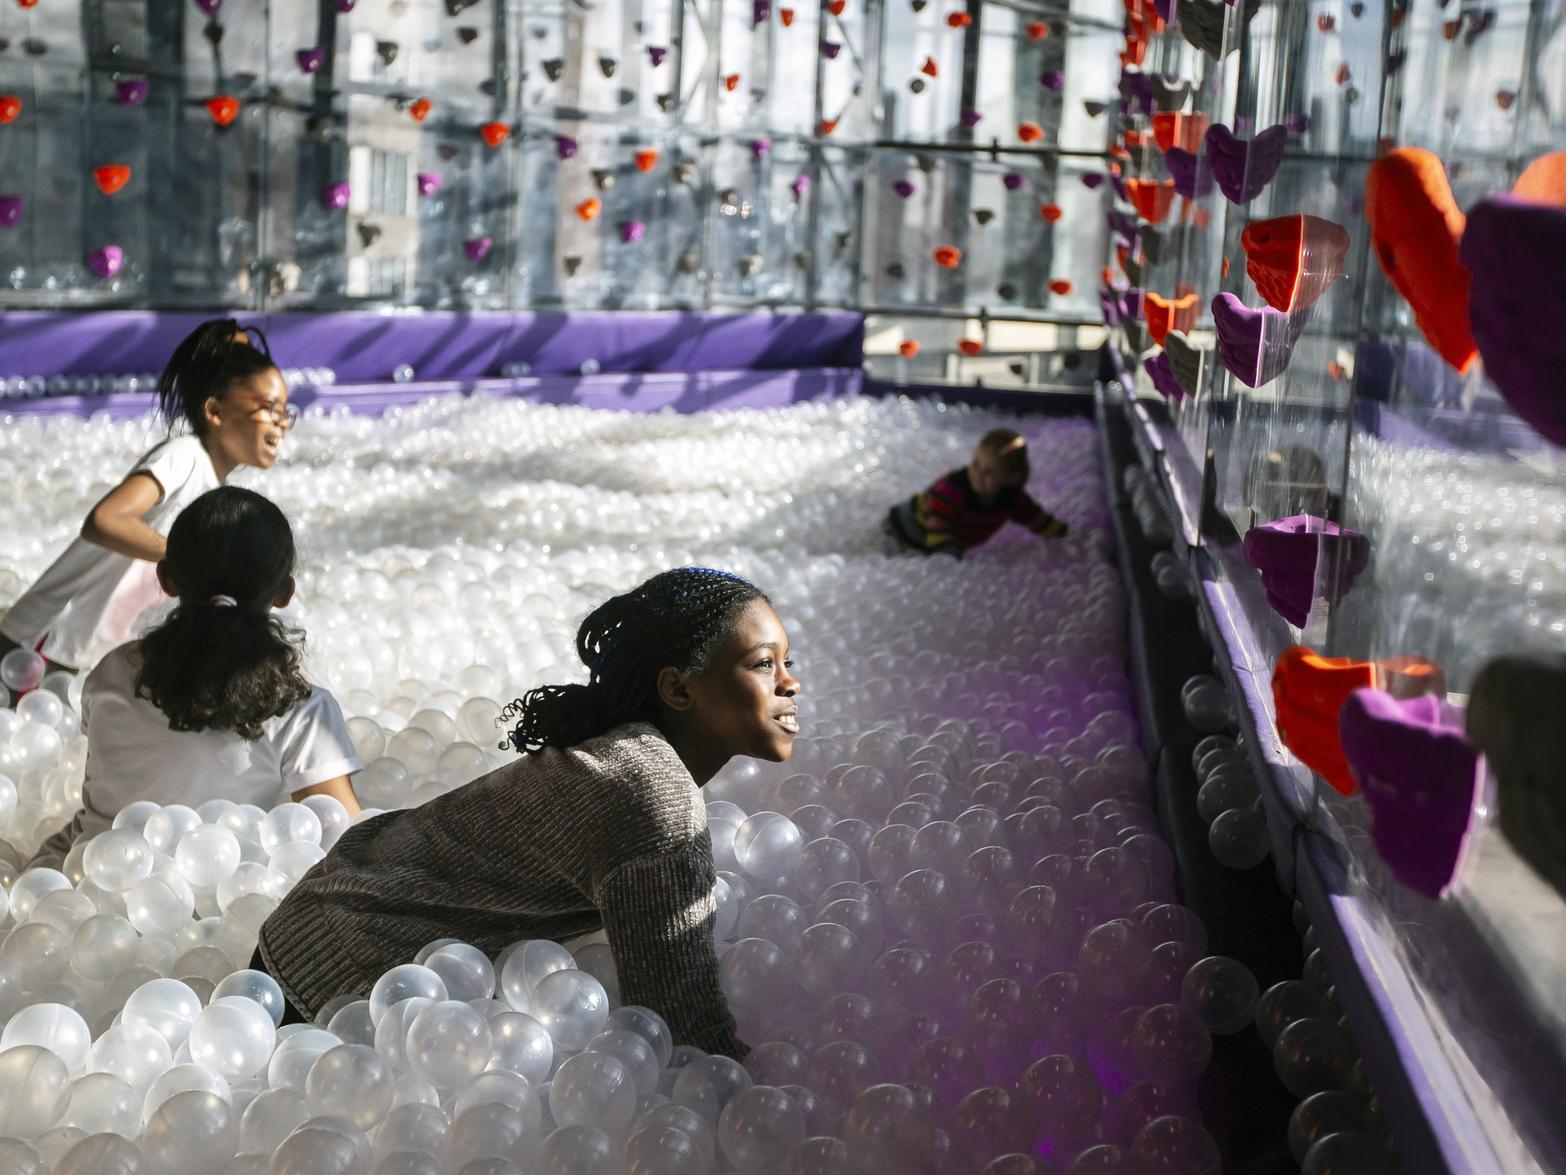 Kids enjoy the huge ball pit at Gravity in Sol Central